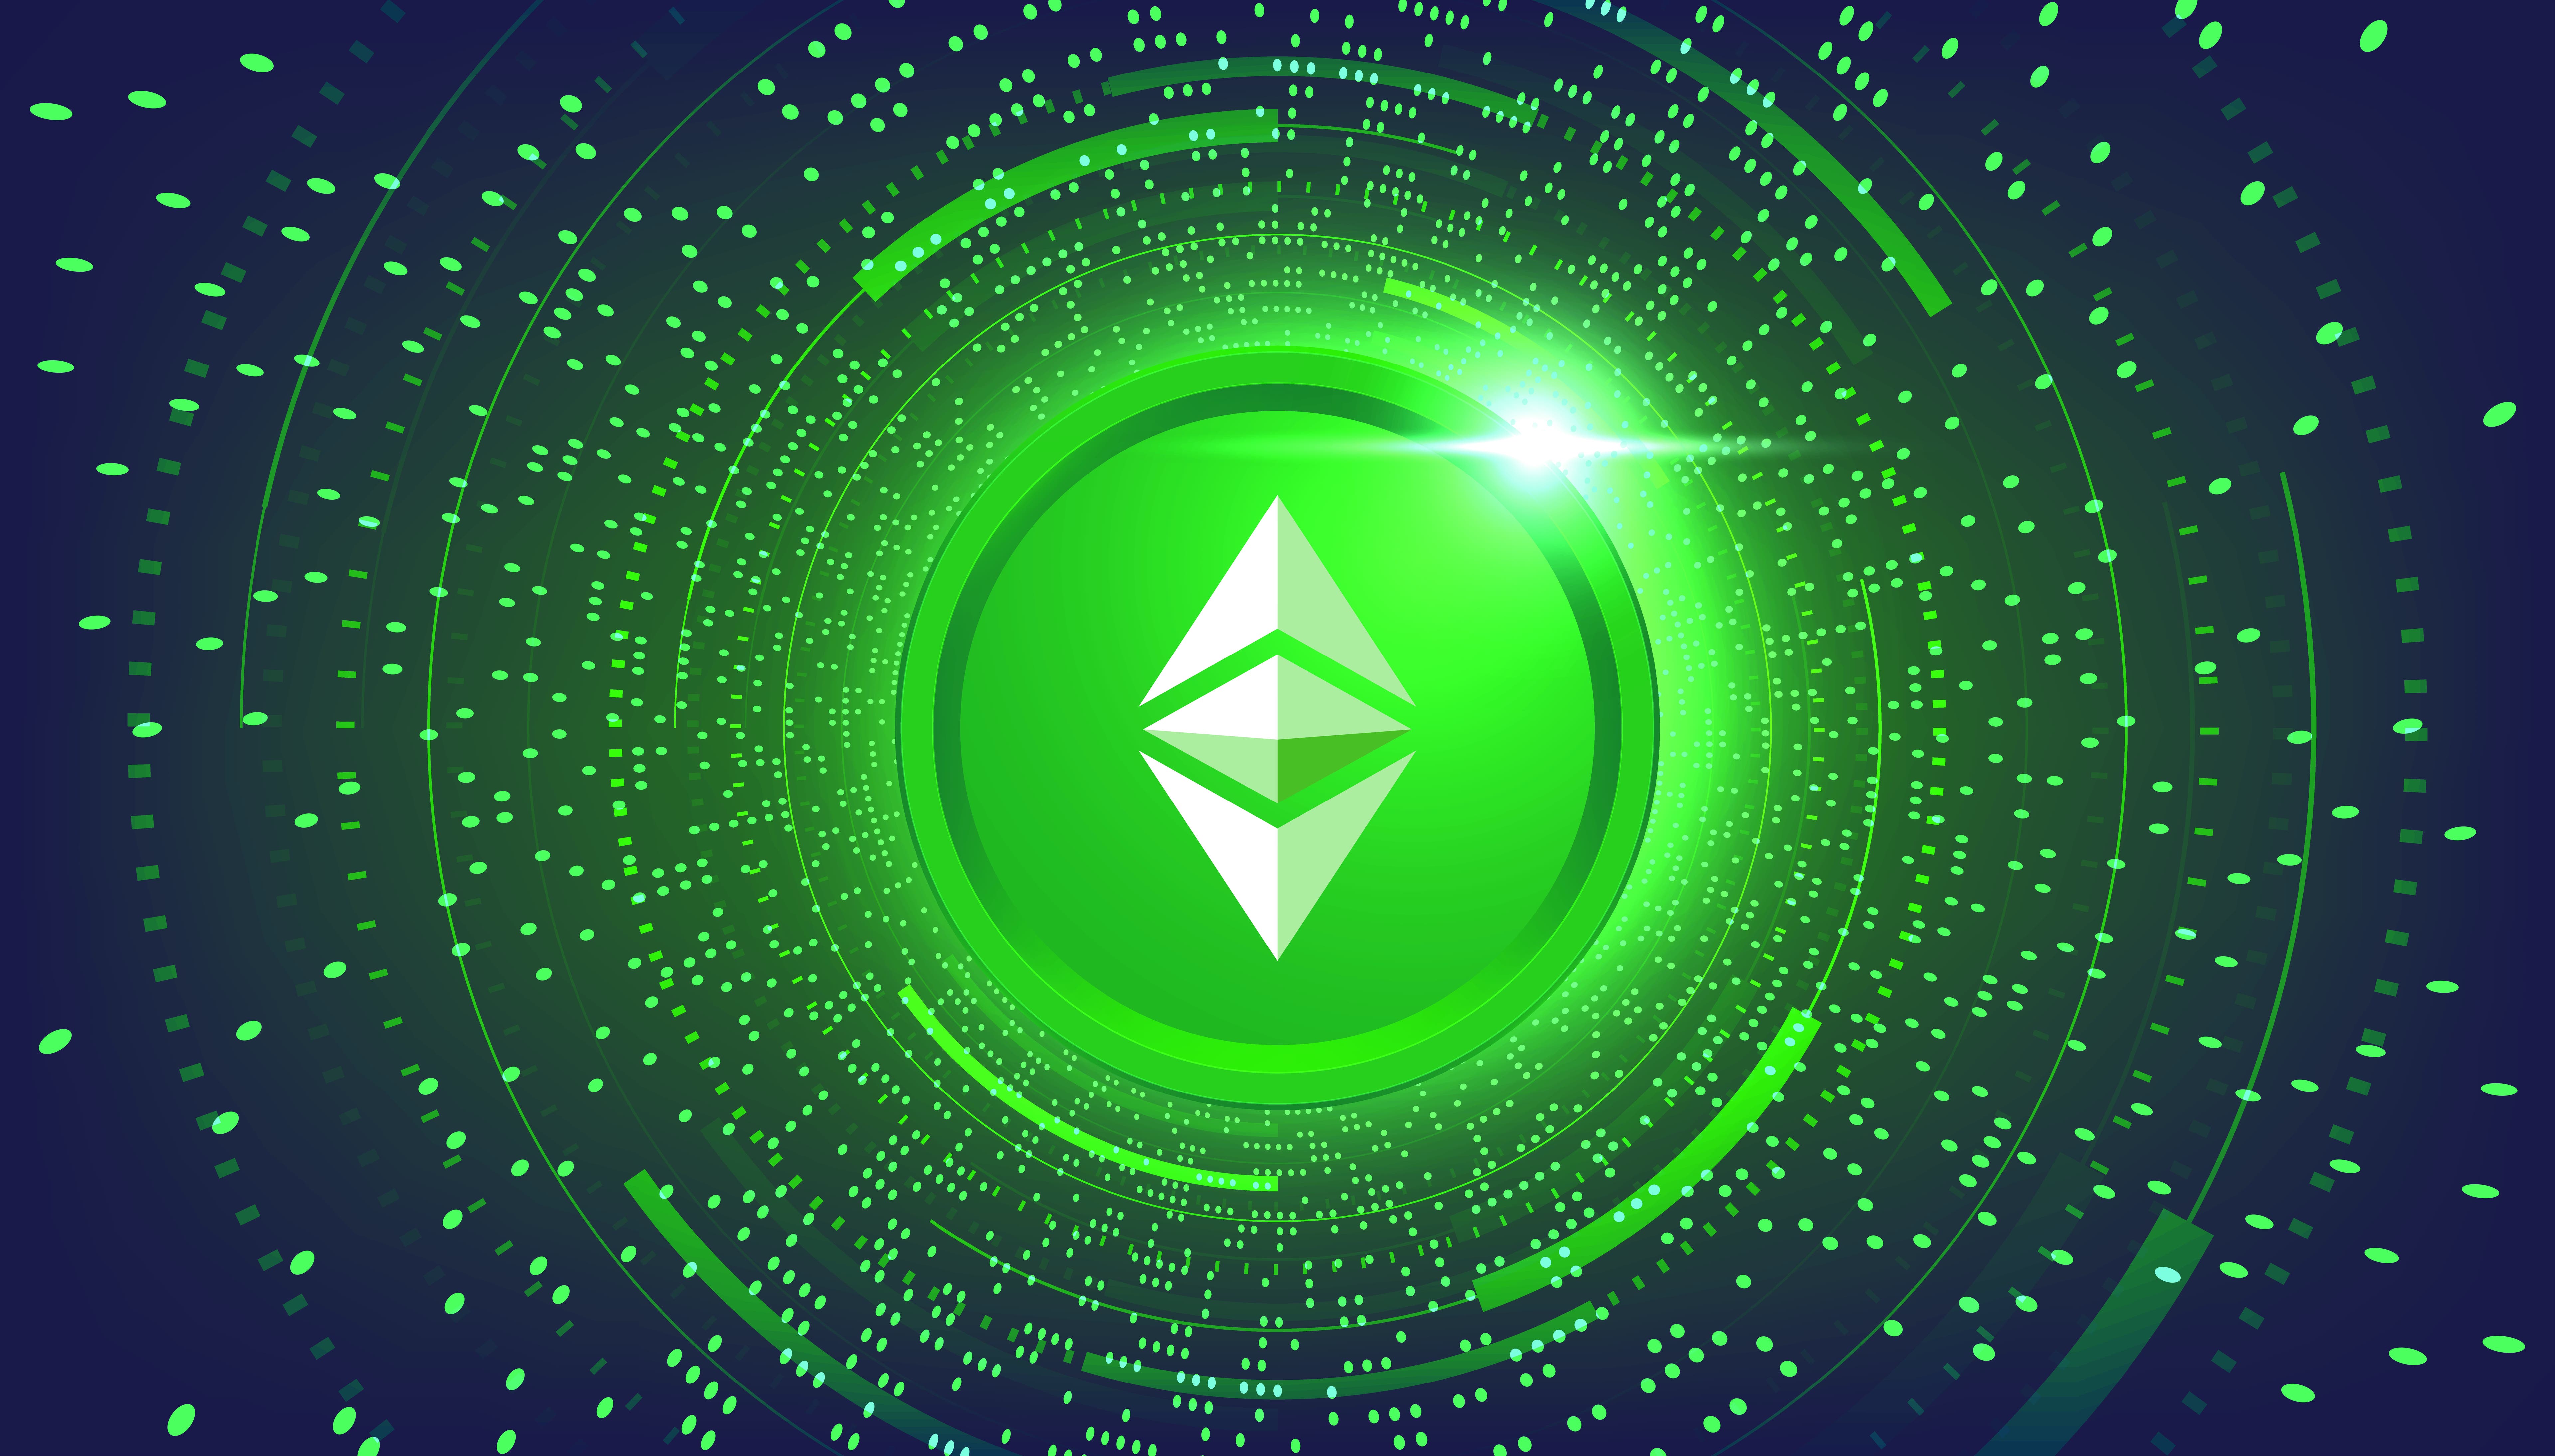 Ethereum Classic Ecosystem Gets $10M From Antpool As Merge Date Nears